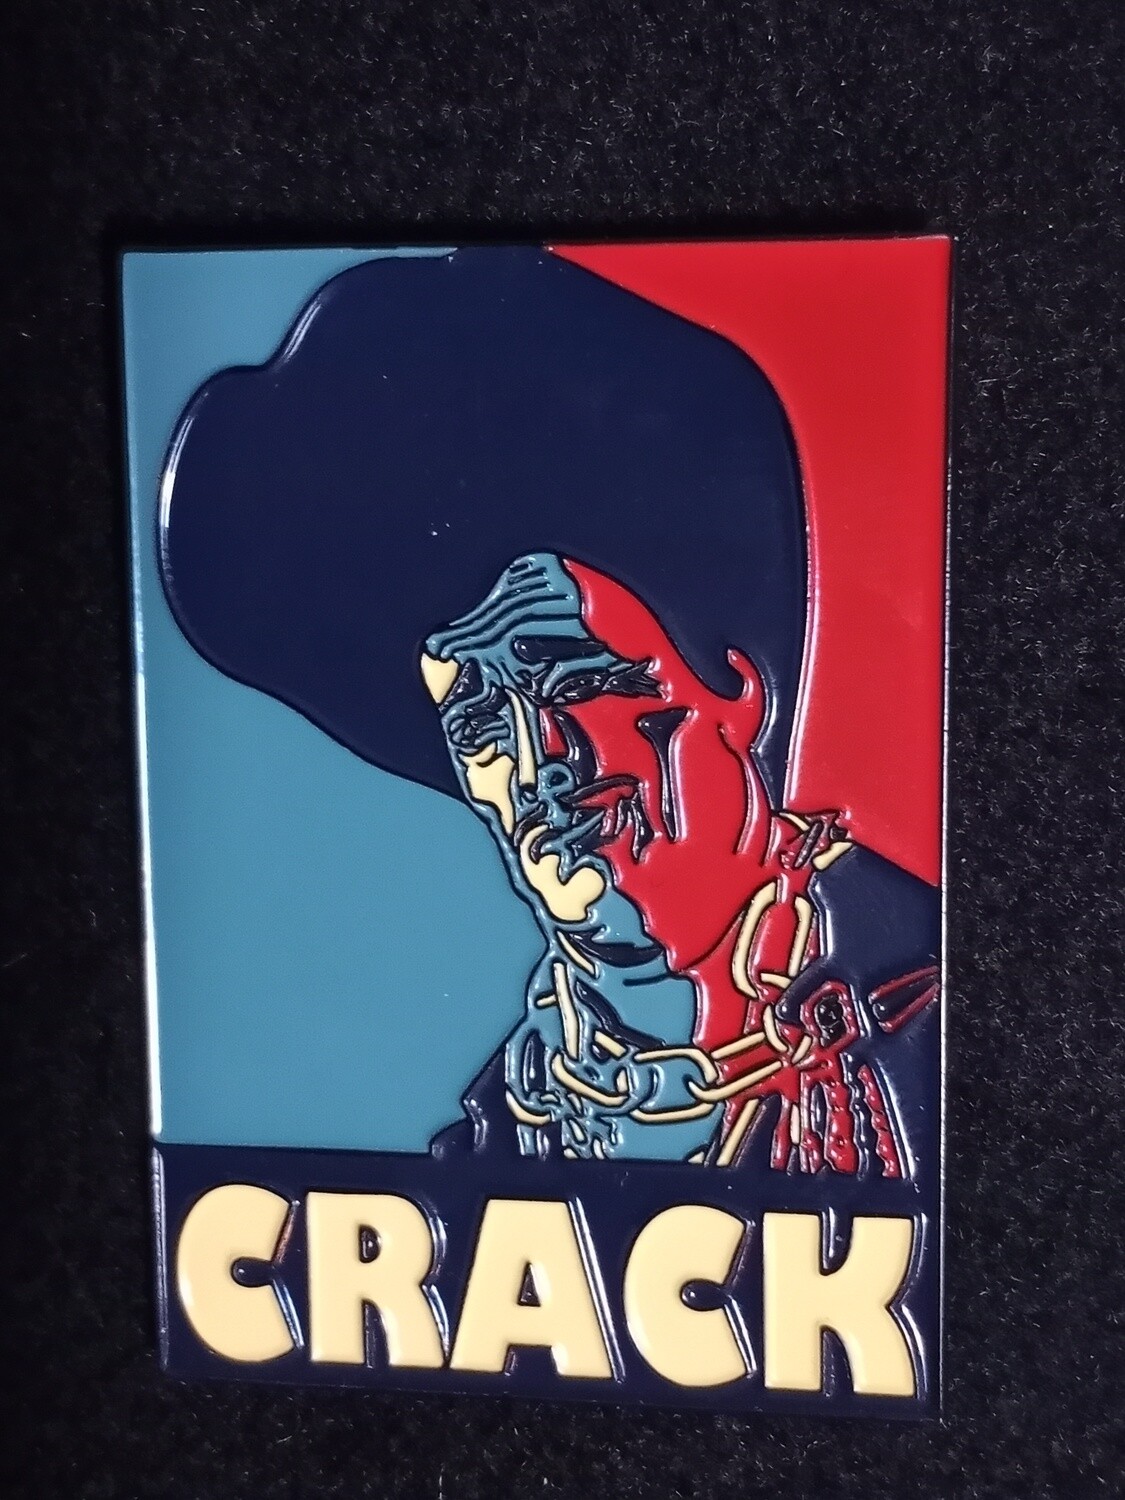 Unlimited Edition Sleazy Crack Pin